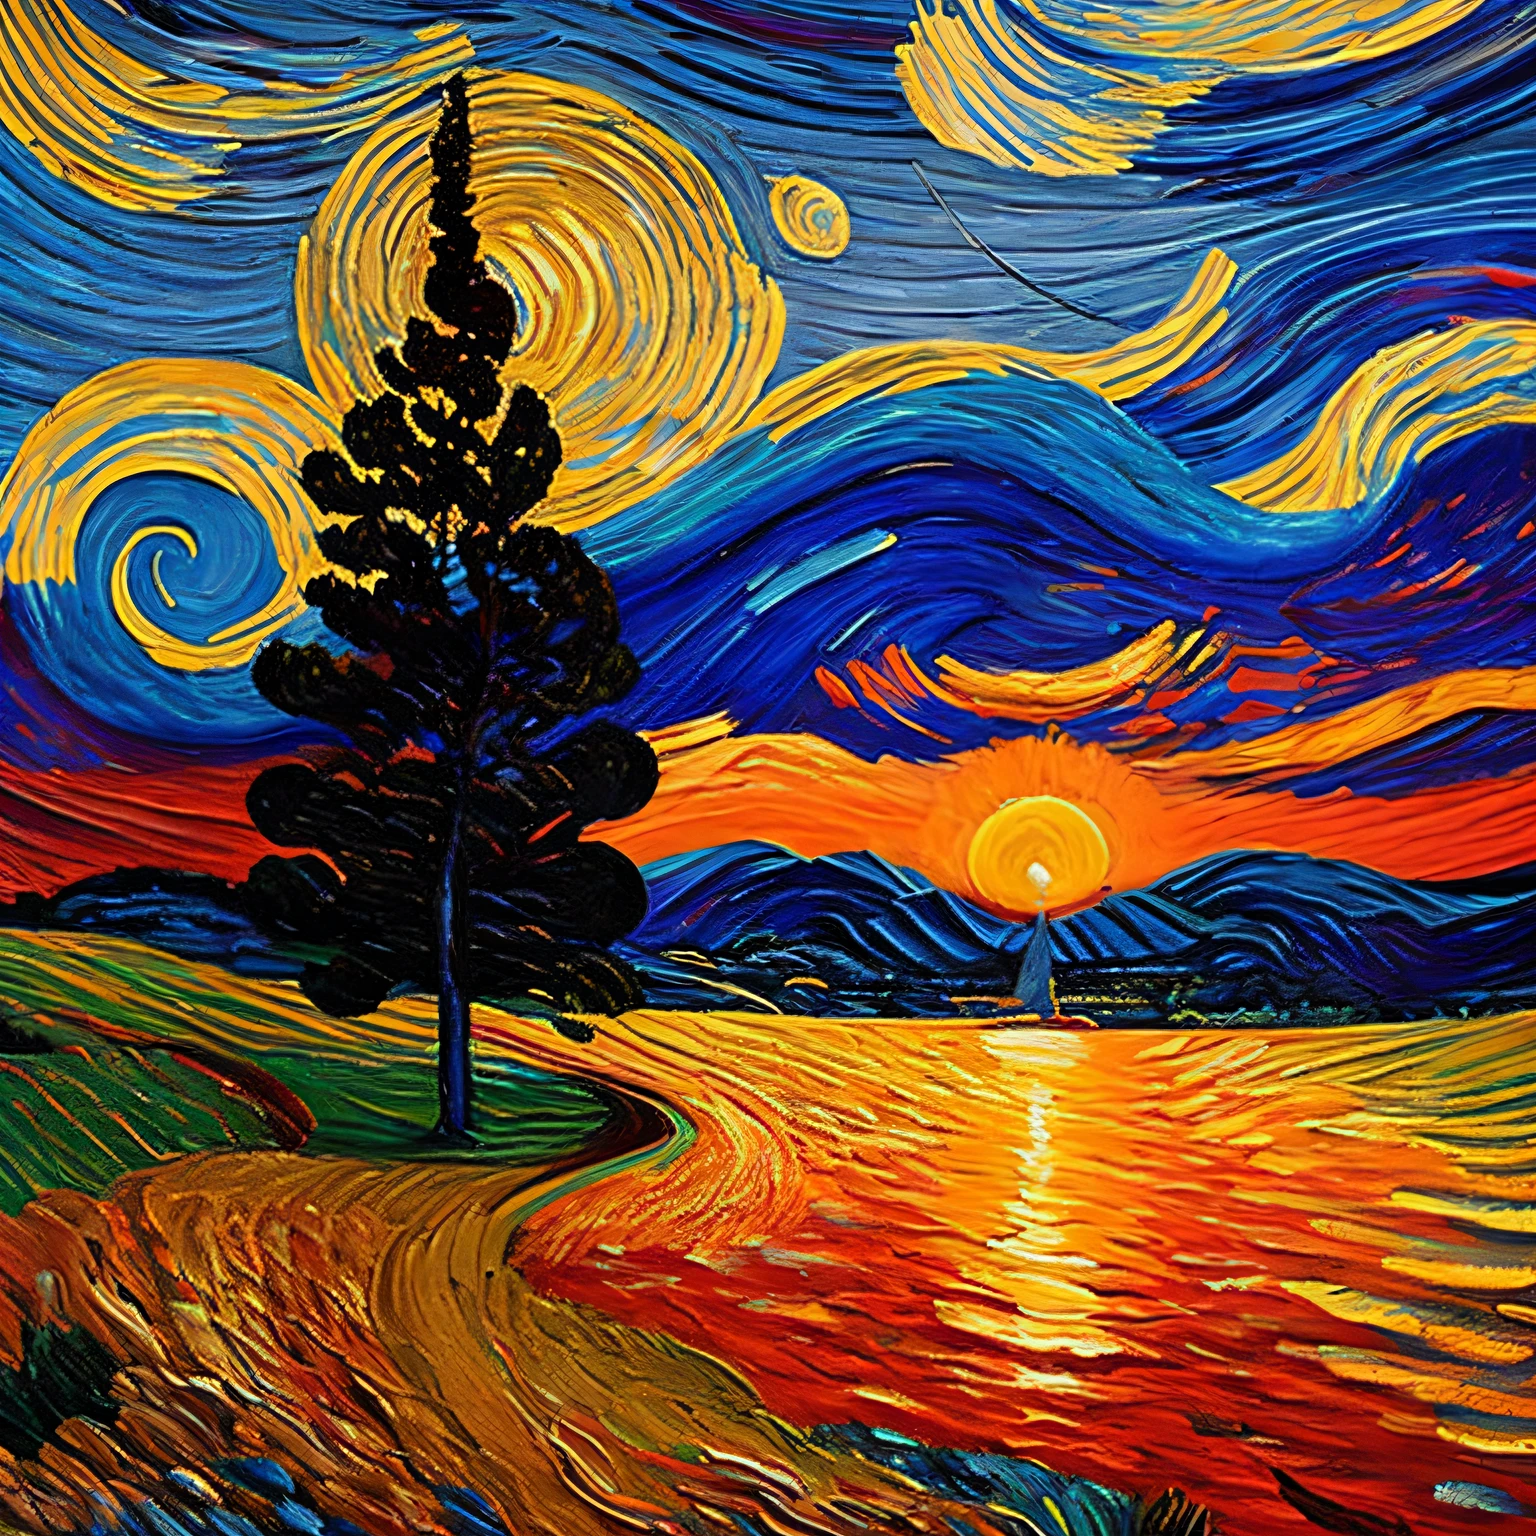 In a world reimagined by the strokes of Van Gogh, the familiar swirls and eddies of "Starry Night" undergo a breathtaking transformation. Instead of the tranquil blues and luminous yellows representing a night sky, a vivid palette of deep oranges, fiery reds, and soft purples paints the canvas. The scene captures the brilliant and transient moment of a setting sun.

The celestial swirls, once filled with twinkling stars, now cradle the setting sun, its fiery orb descending slowly, casting a radiant glow that dances and intermingles with the surrounding whirls of color. The cypress trees, still reaching upward in their darkened silhouettes, seem to stretch even taller, as if trying to hold onto the last remnants of daylight.

In the town below, the warm, amber light from the sunset bathes the quaint buildings, casting elongated shadows and transforming the town into a haven of golden hues. The church steeple, a once solitary sentinel against the night, now stands outlined by the sun's passionate embrace, its structure taking on a soft, almost ethereal quality.

Every brushstroke, with its vivid intensity, conveys the artist's emotional response to this daily, yet miraculous spectacle. This isn't just a sunset; it's Van Gogh's sunset, a swirling masterpiece of warmth, passion, and a fleeting moment in time, forever captured on canvas.